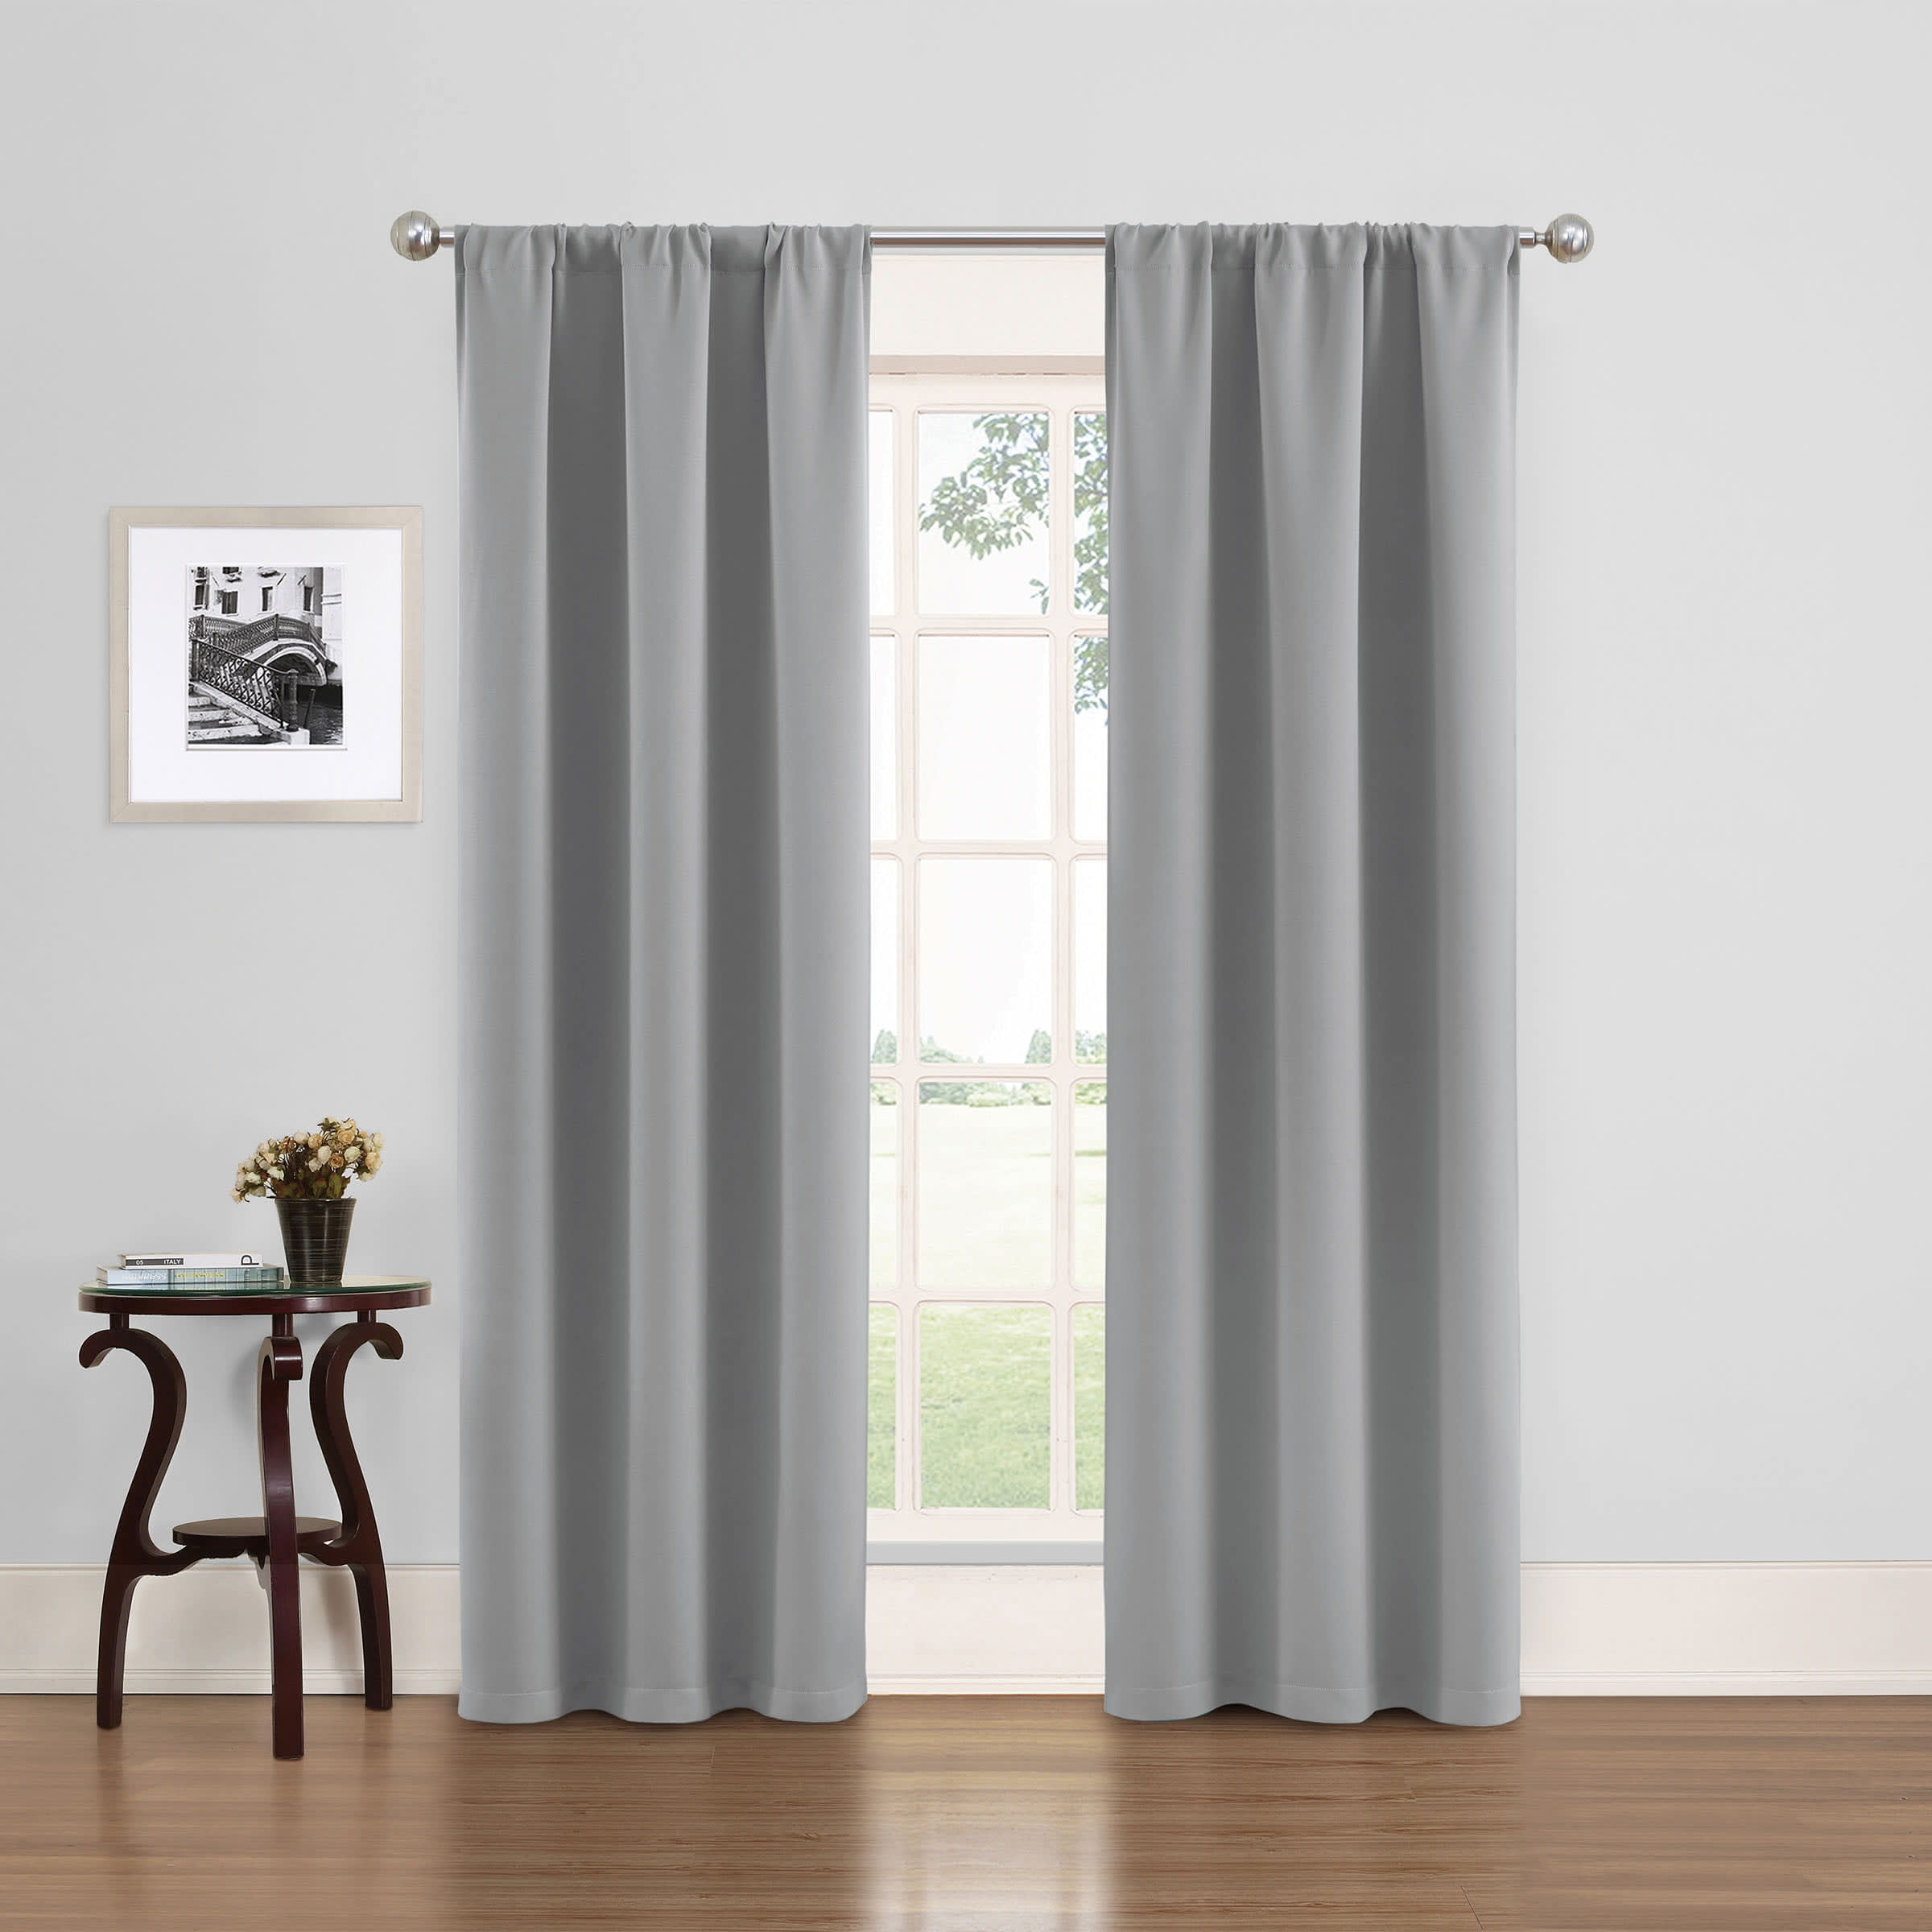 Mainstays Marjorie Sheer Voile Curtain, Single Panel, 59w x 84l,  Brownstone - DroneUp Delivery